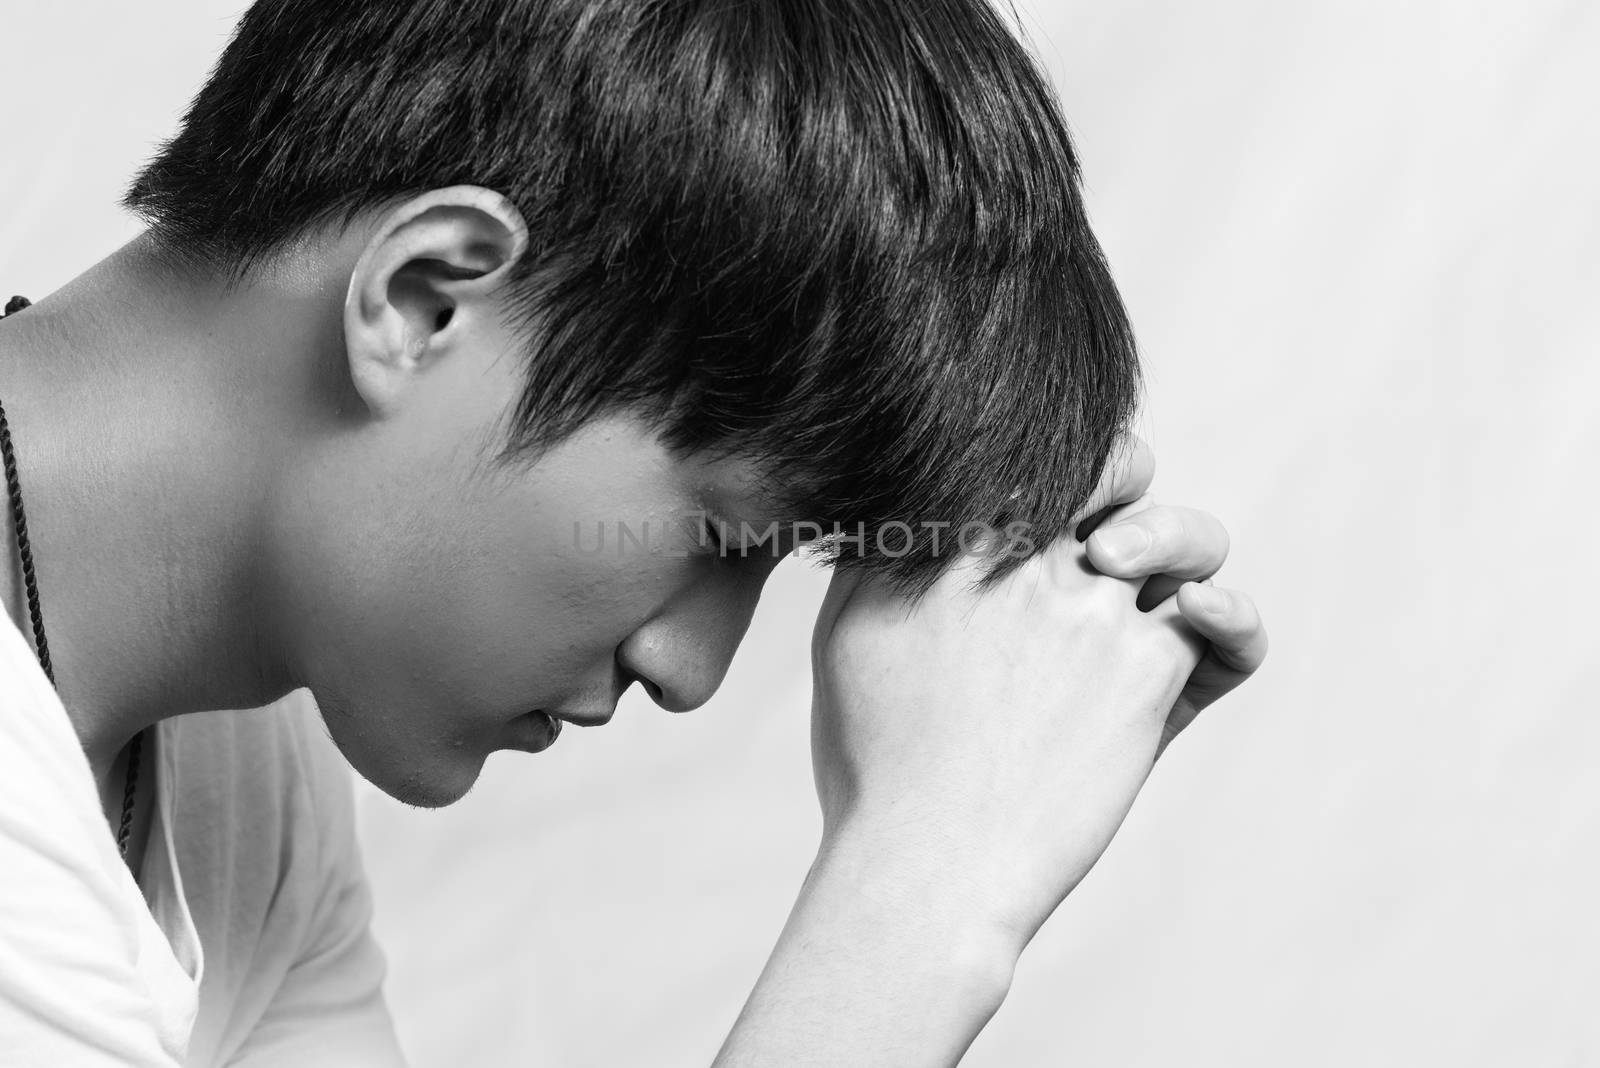 Young man looking depressed by IVYPHOTOS